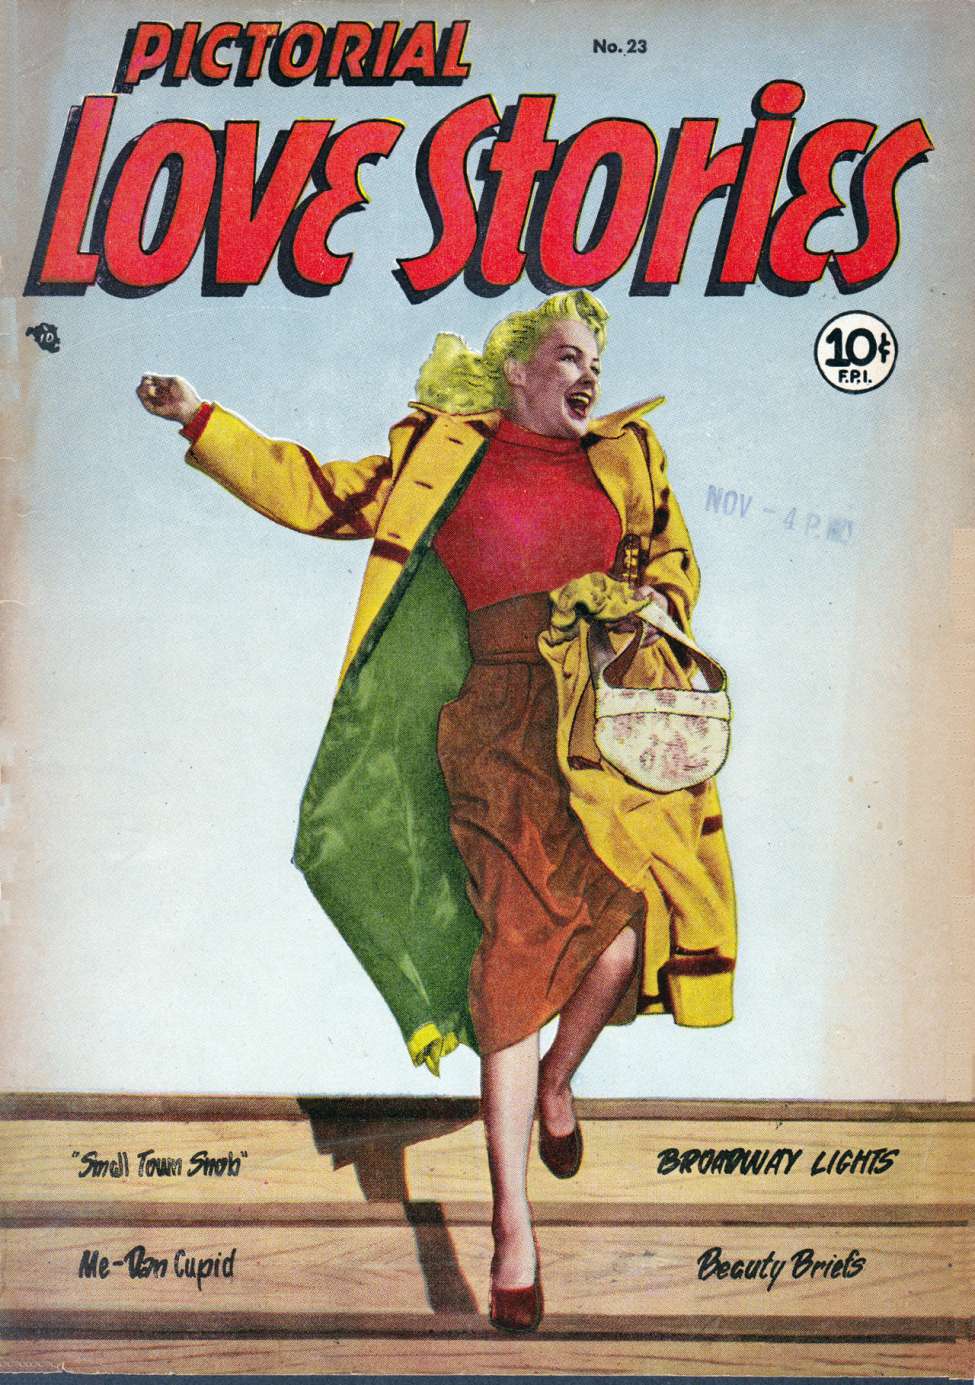 Book Cover For Pictorial Love Stories 23 - Version 1